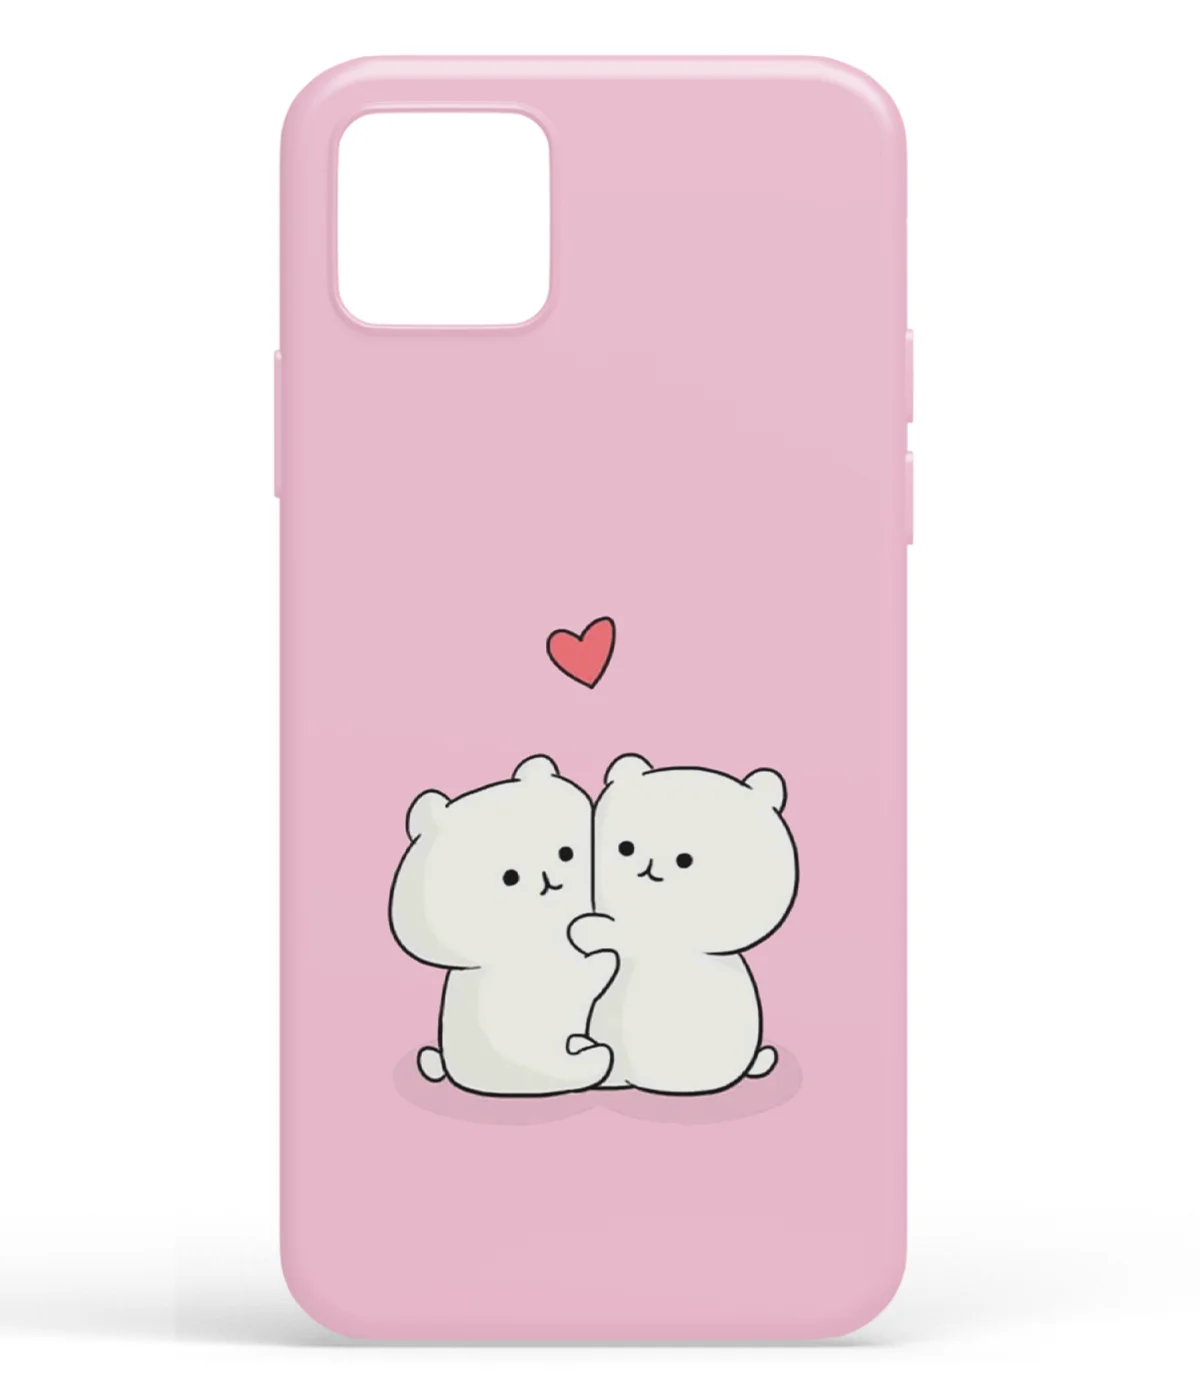 Buy Cute Couple Cartoon Printed Soft Silicone Back Cover